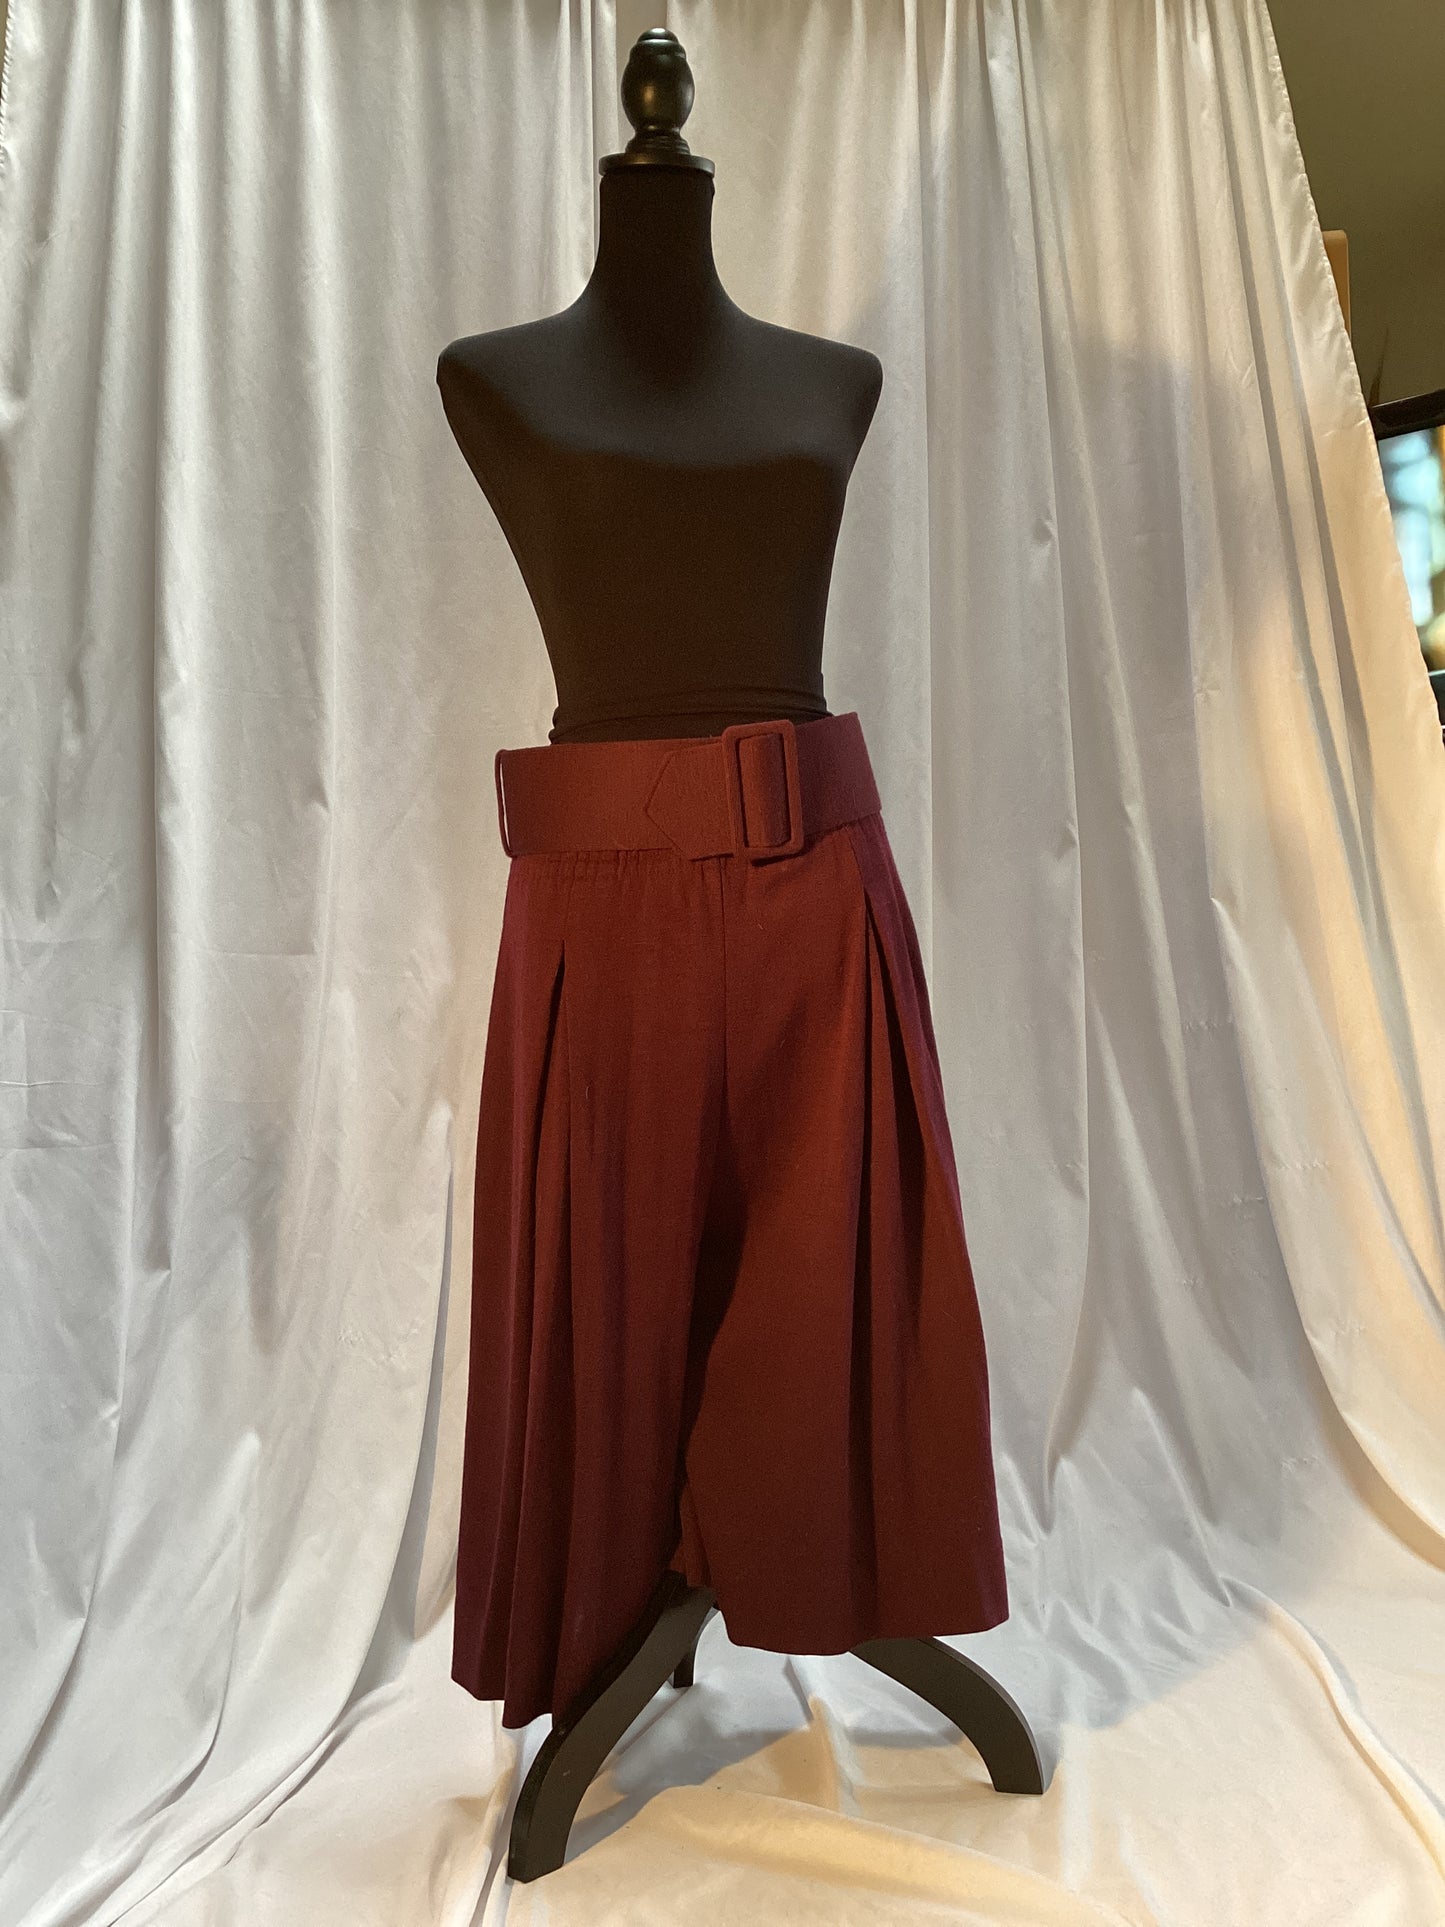 Semplice 3 Piece Vintage Suit with Belt and Culotte "Skirt"